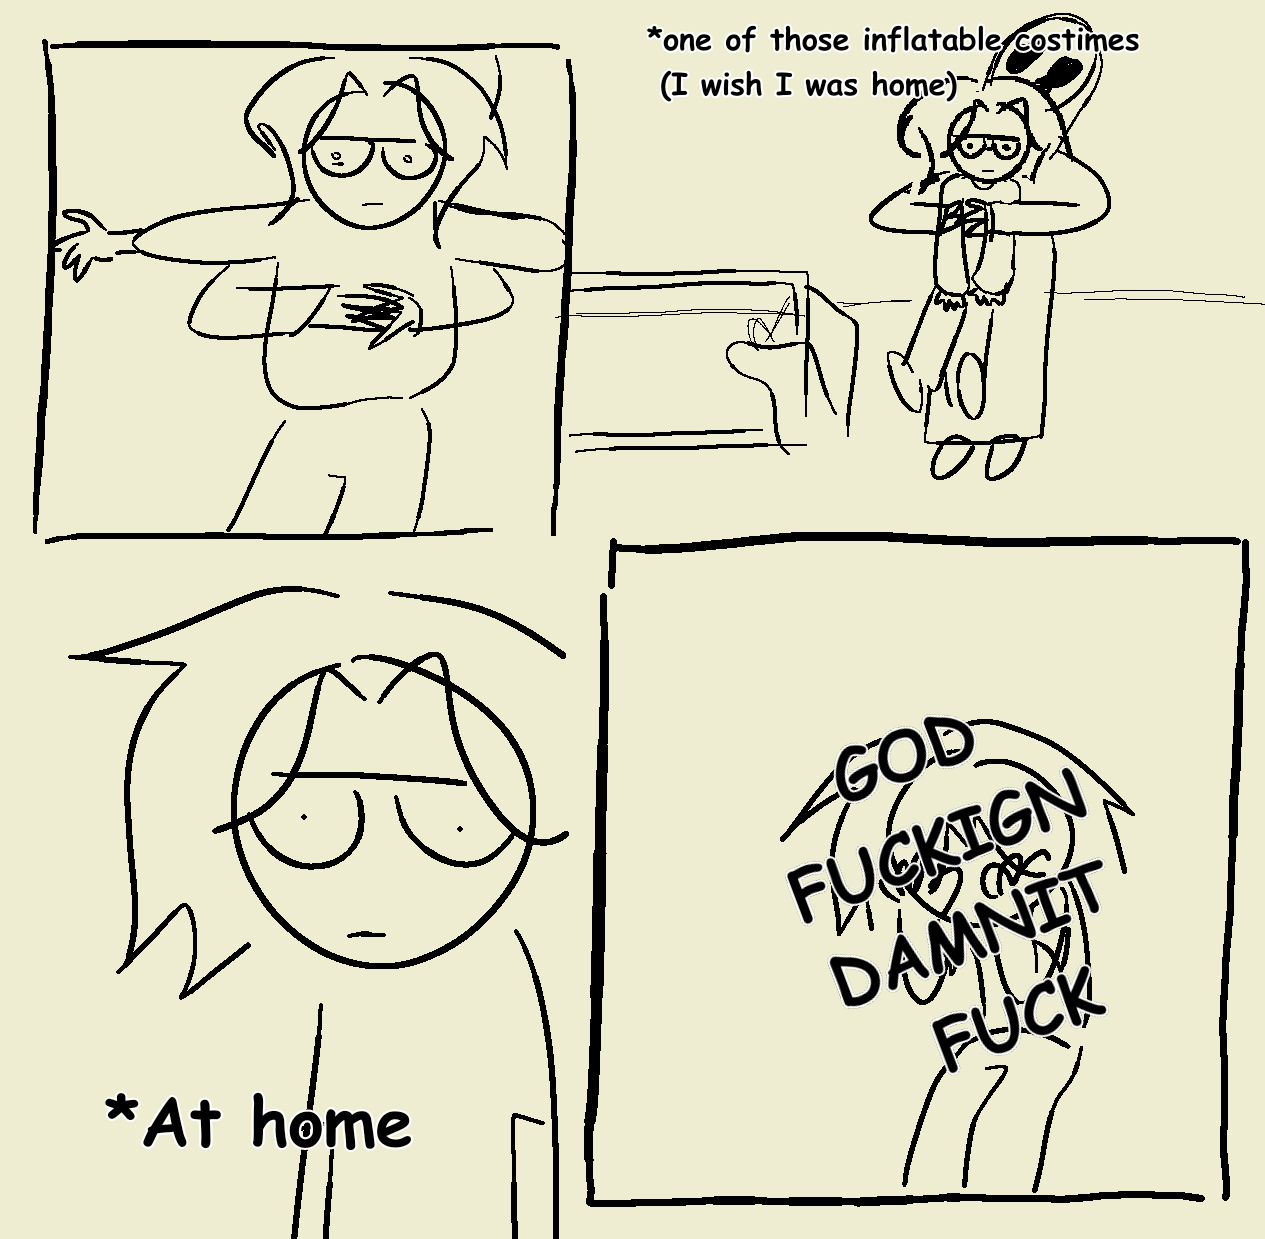 yellow 4 panel comic of me in an inflatable costume, going home, then feeling like shit